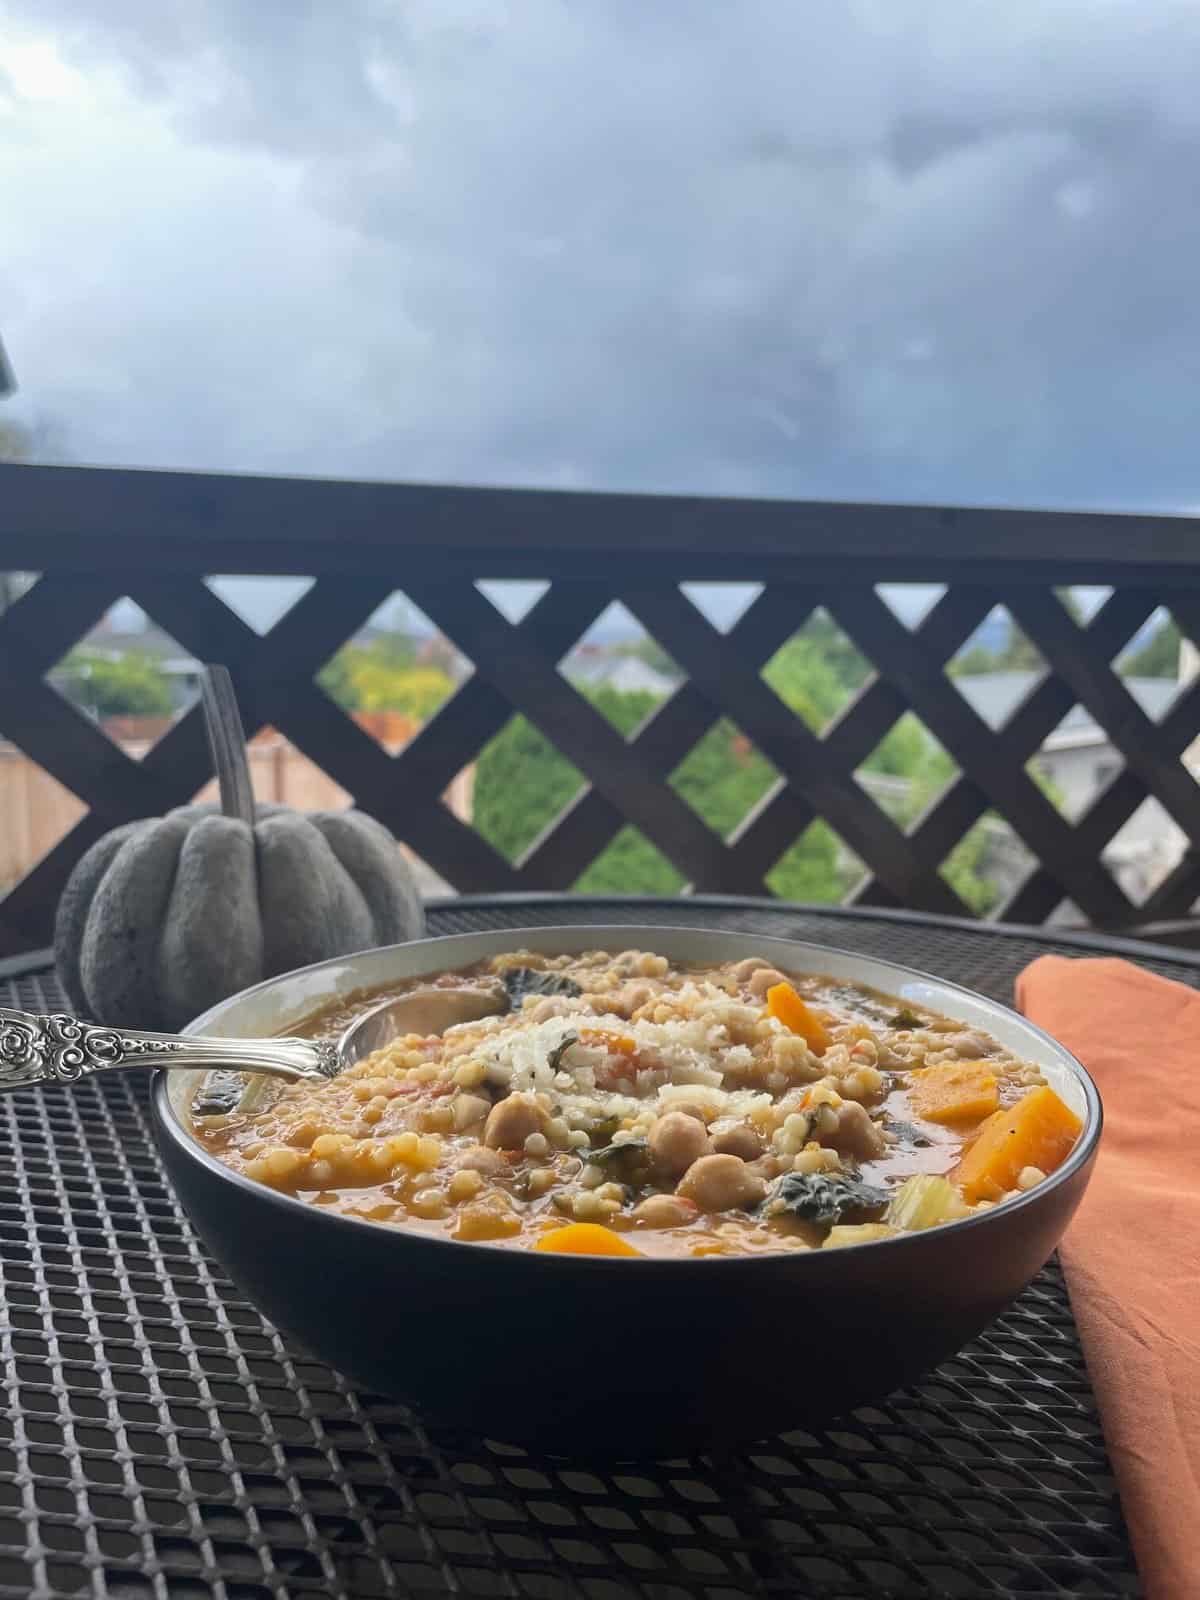 steaming bowl of garbanzo bean soup with pumpkin and cloudy day in background.